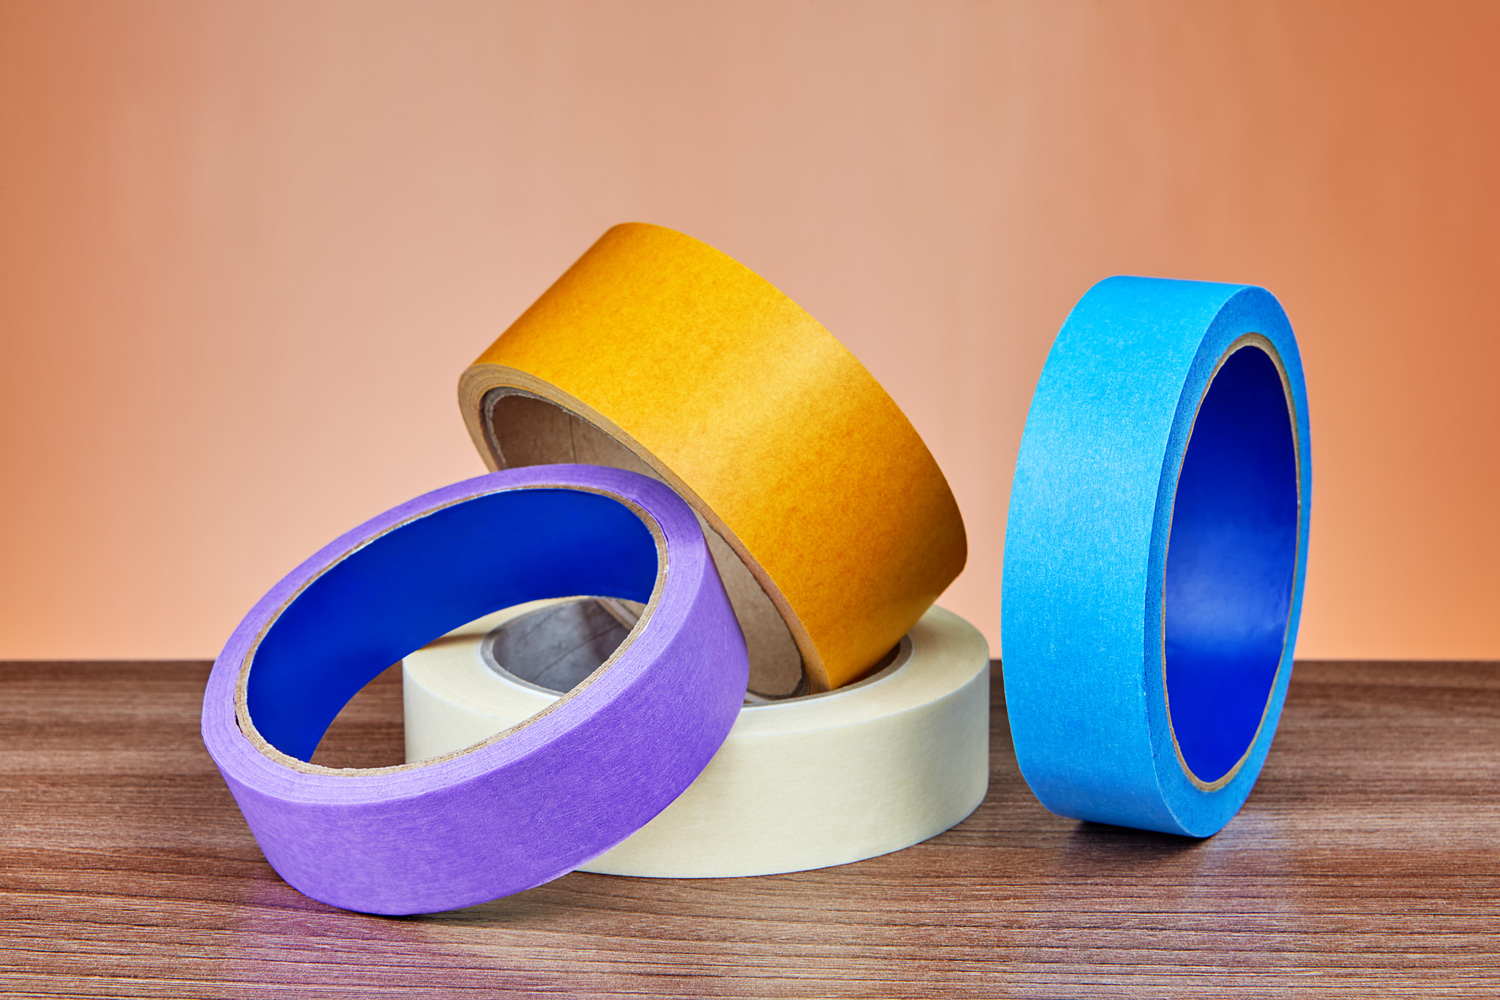 Four multicolored rolls of adhesive tape for various purposes lie on table.